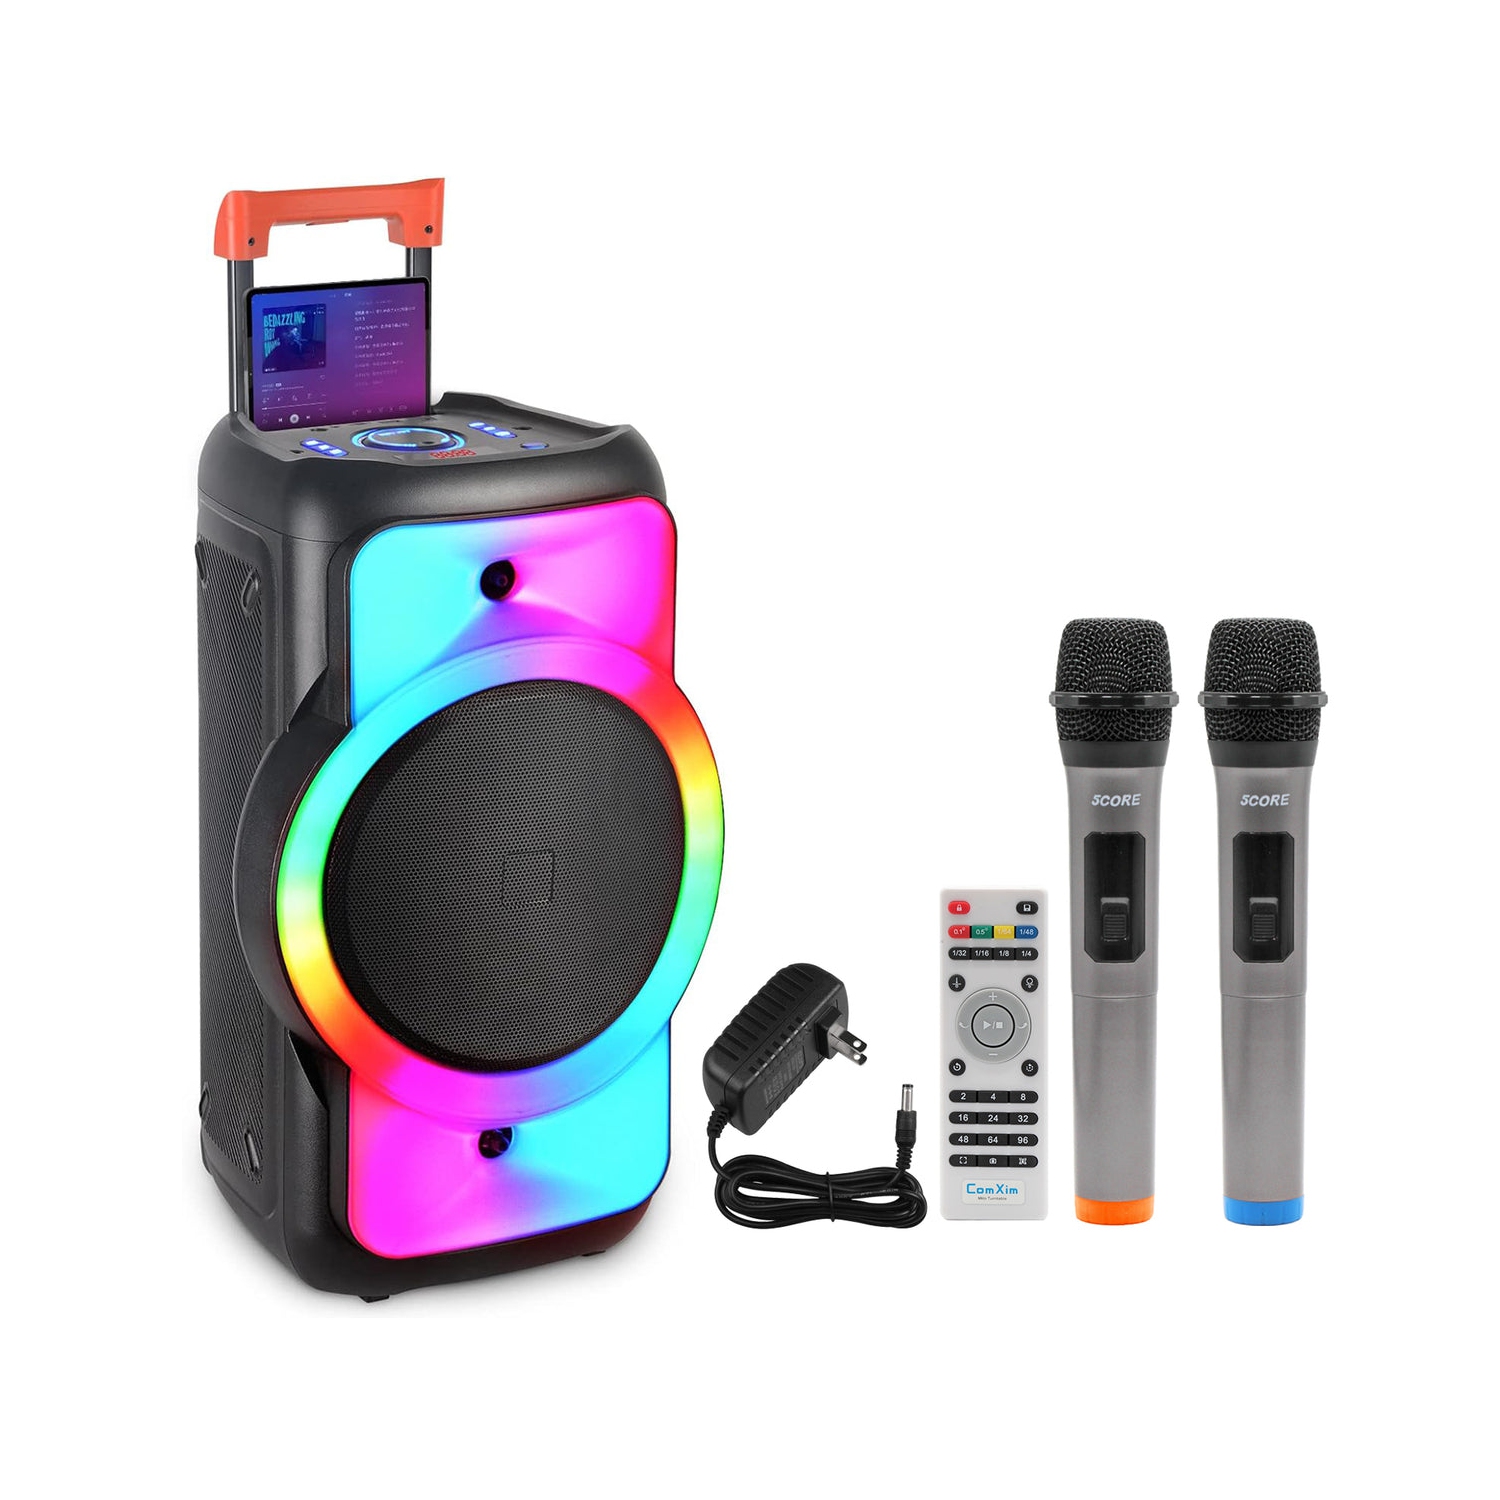 5 Core Bluetooth Speaker Karaoke Machine Portable Singing PA System w Cool DJ Light Support FM + TWS + USB + Memory Card+ AUX + REC Party Speakers Includes Two Wireless Mics